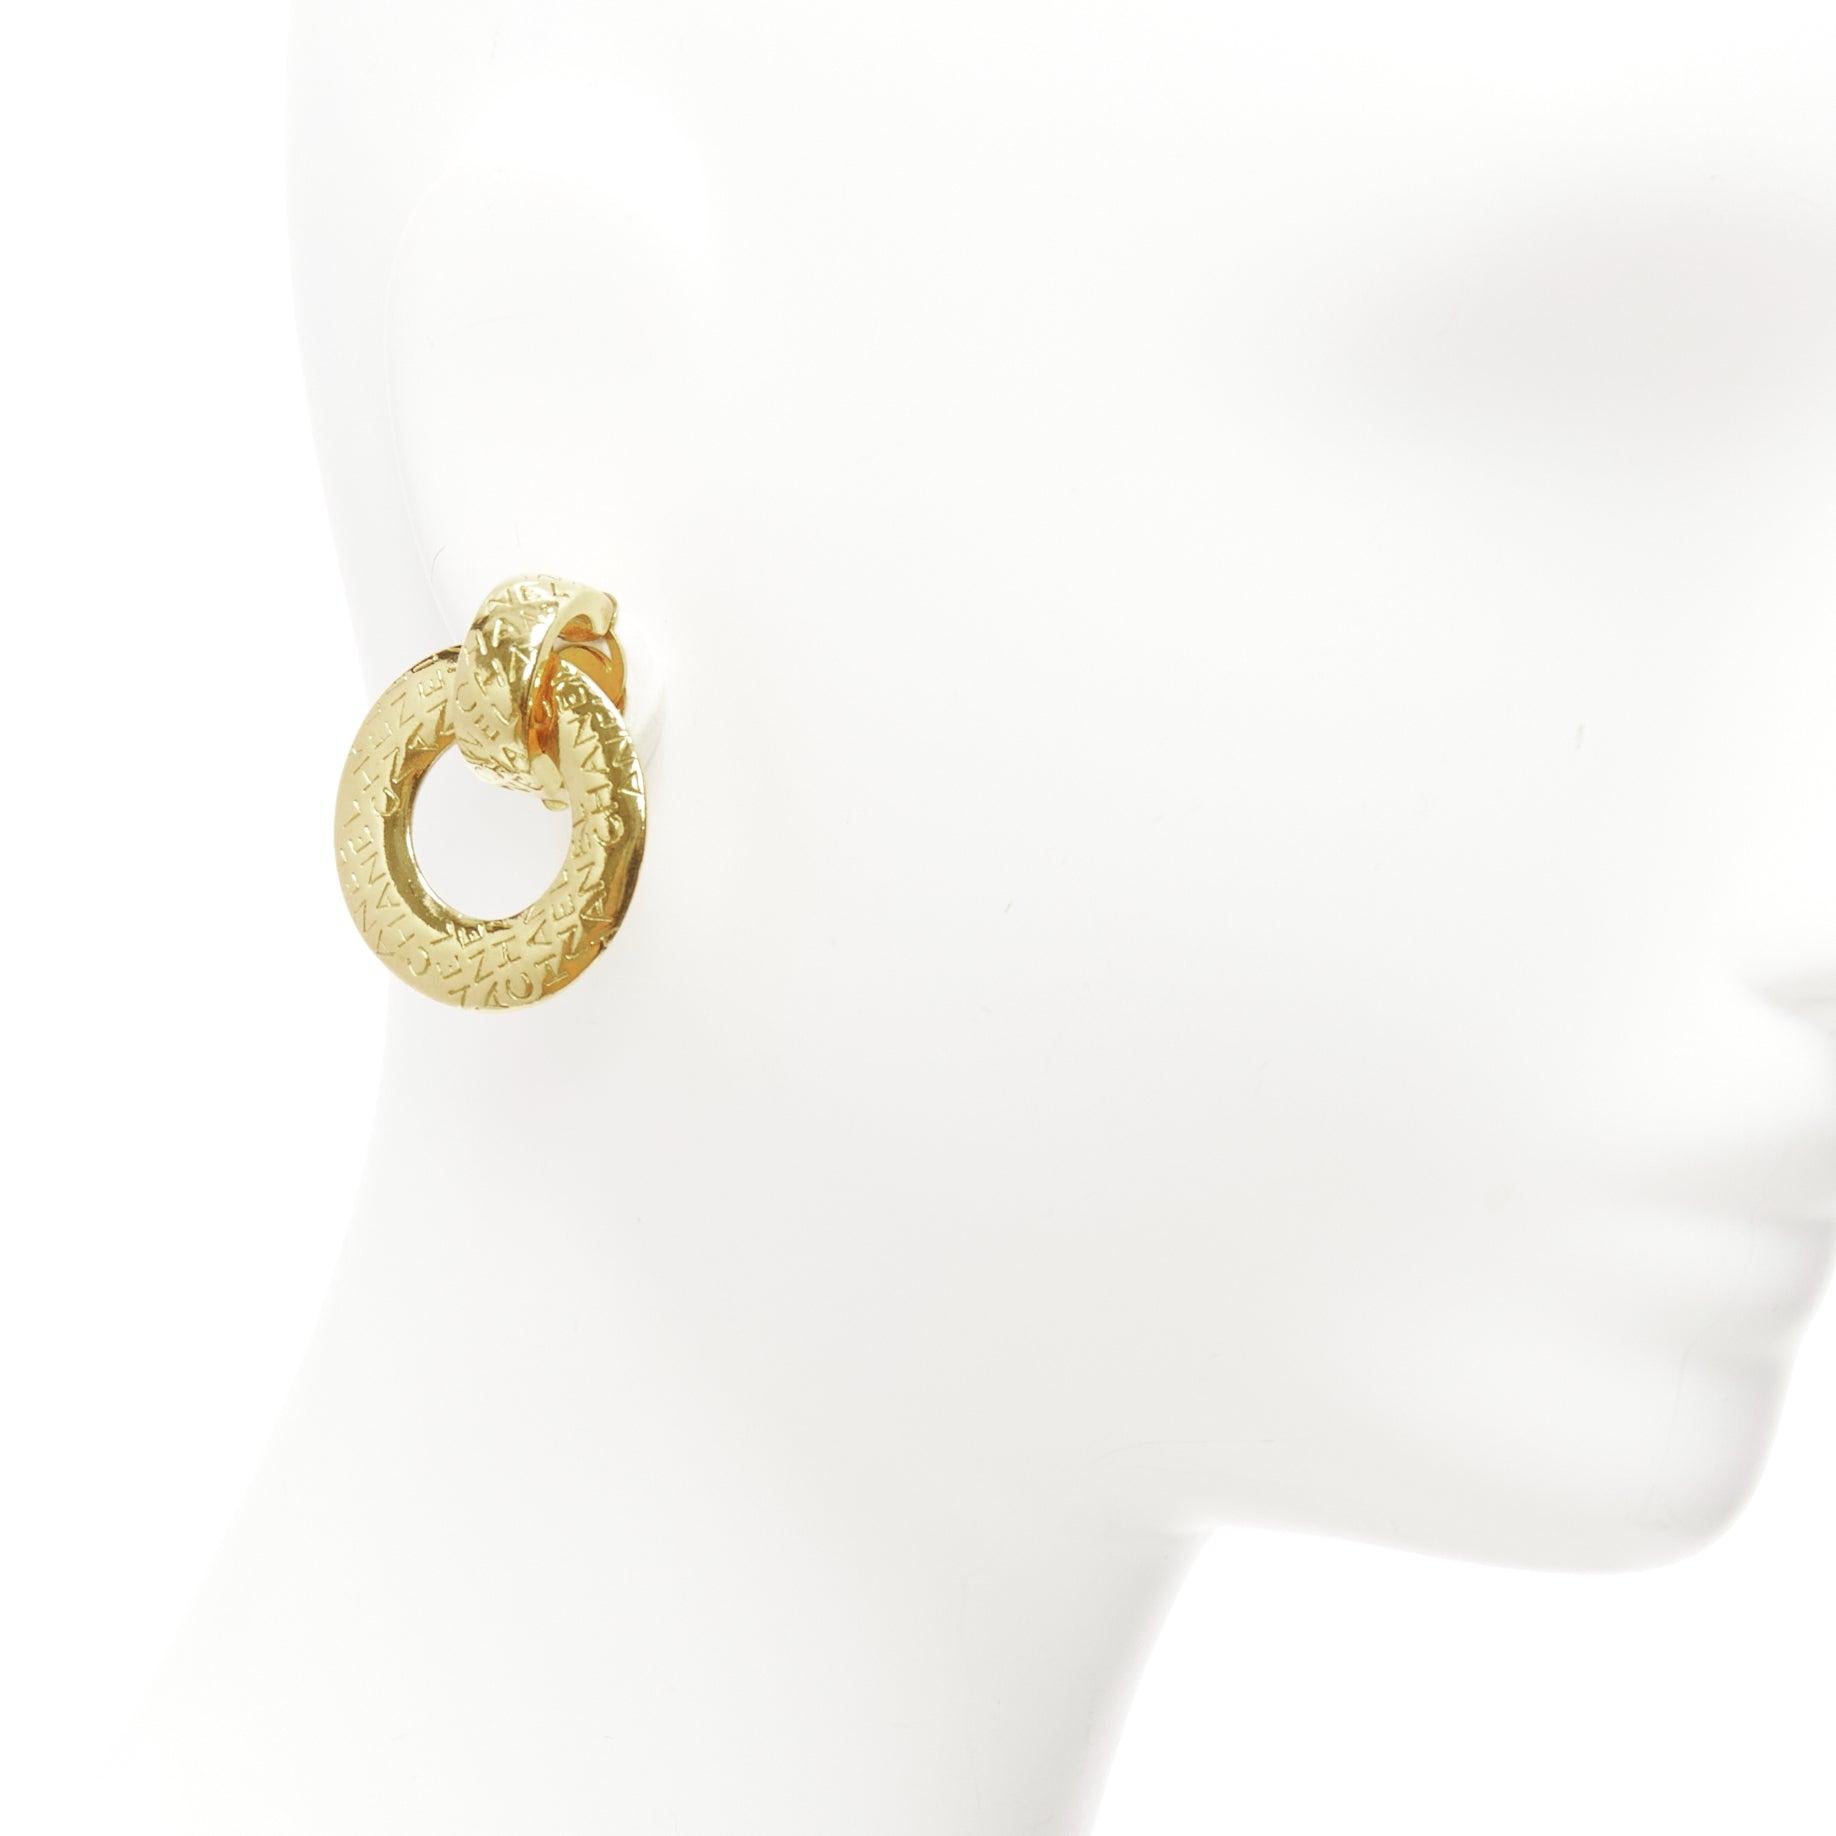 CHANEL Vintage gold etched CC logo monogram drop ring oversized clip on earrings
Reference: TGAS/D00906
Brand: Chanel
Designer: Karl Lagerfeld
Collection: 1980's
Material: Metal
Color: Gold
Pattern: Monogram
Closure: Clip On
Lining: Gold Metal
Extra